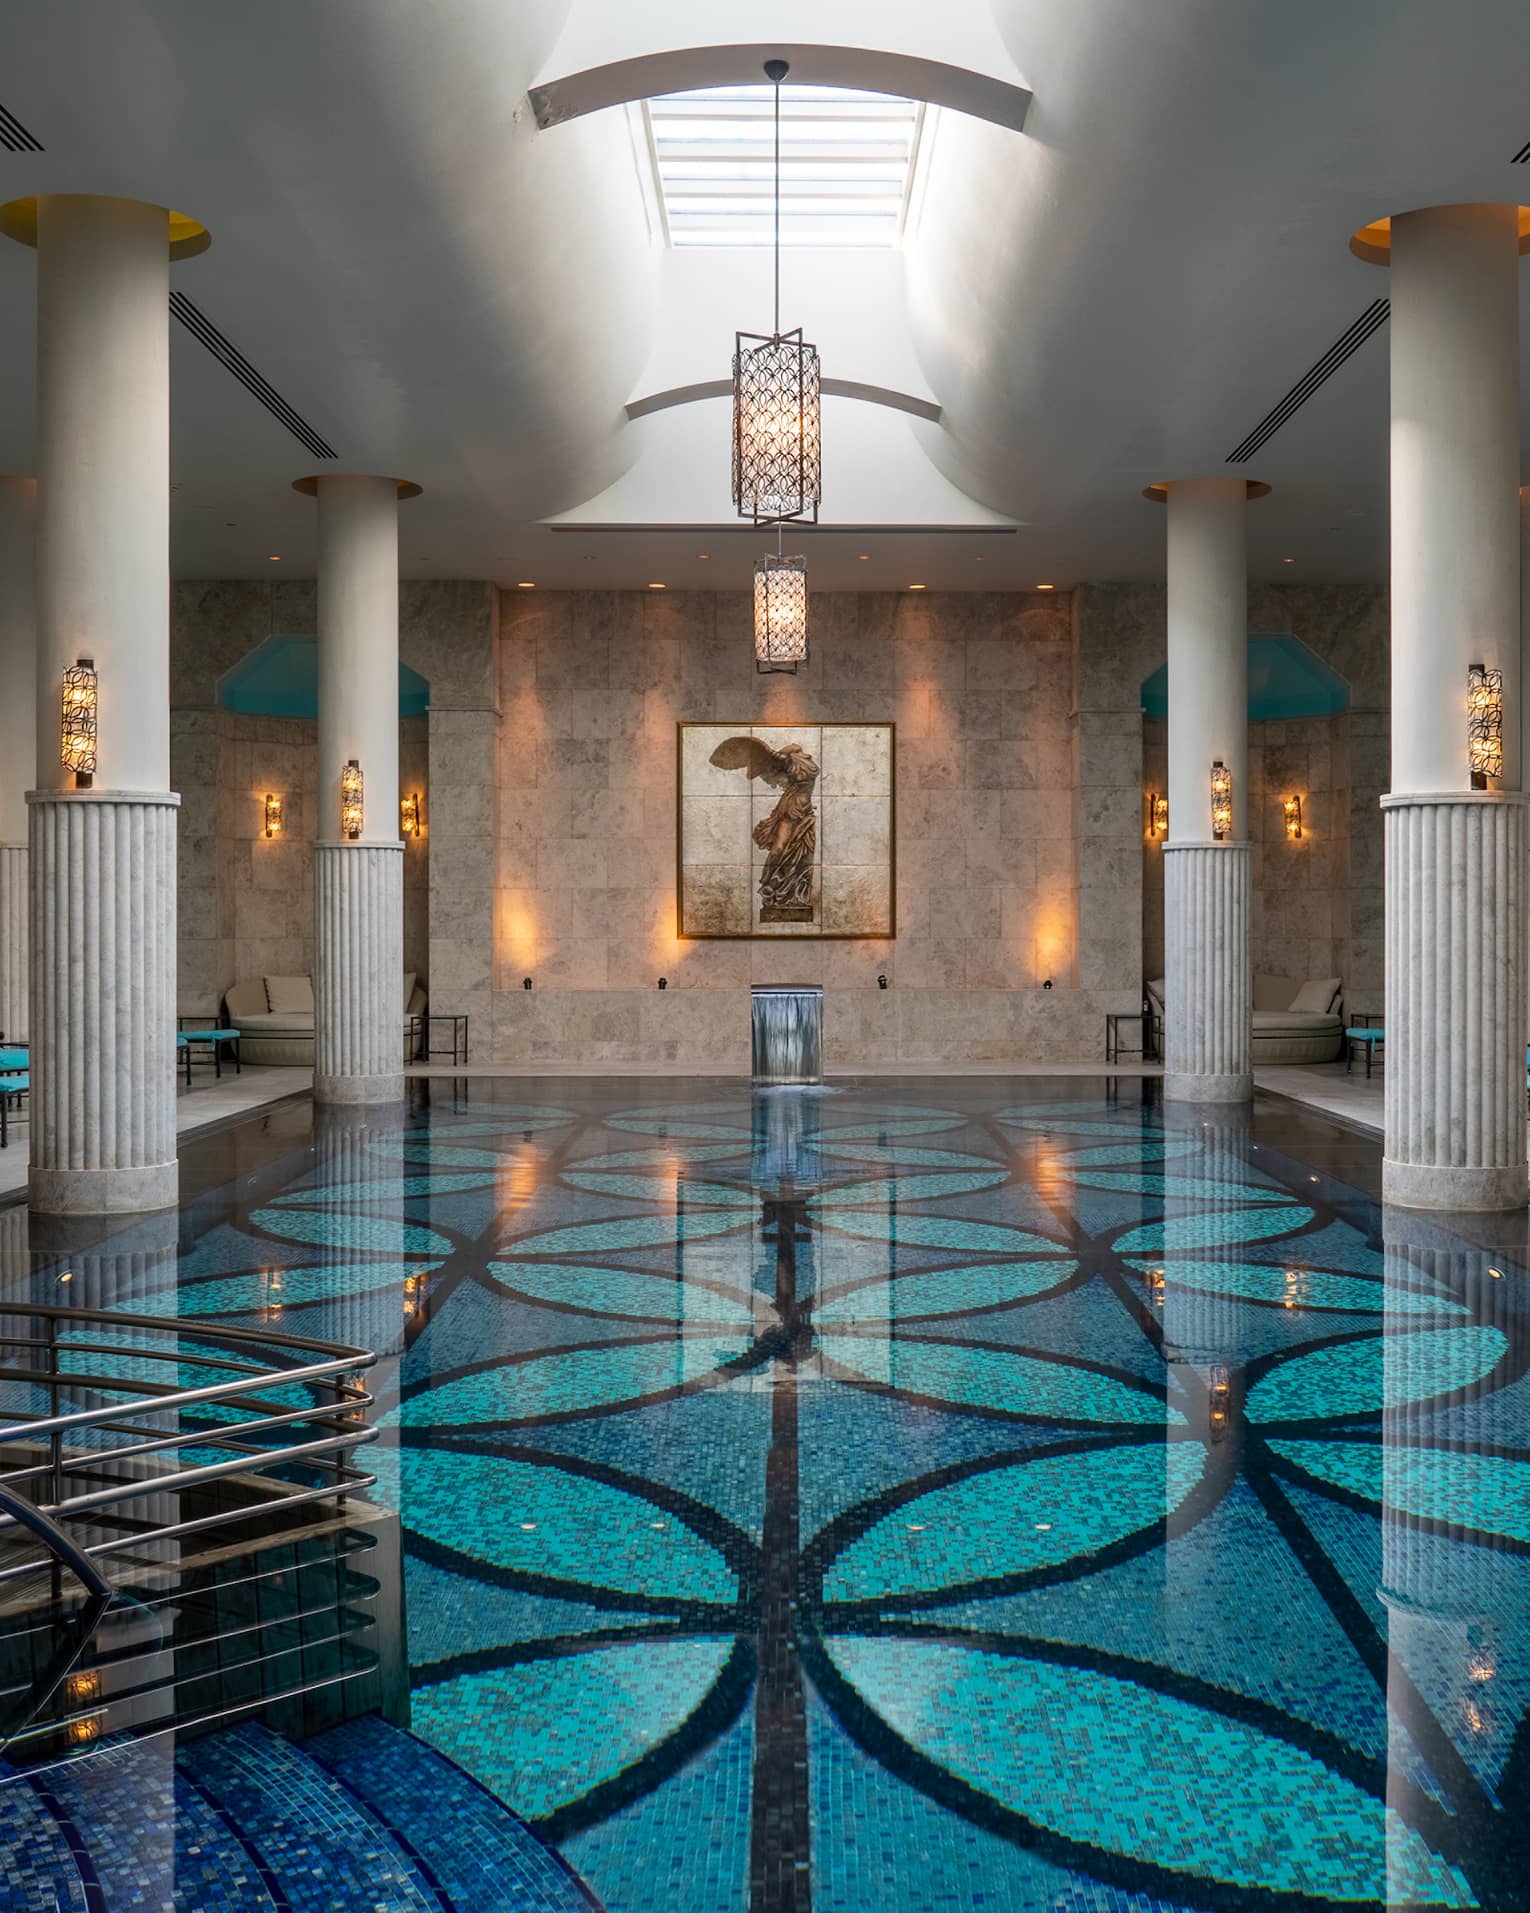 Indoor pool with blue-patterned floor, white up-lit columns and skylight